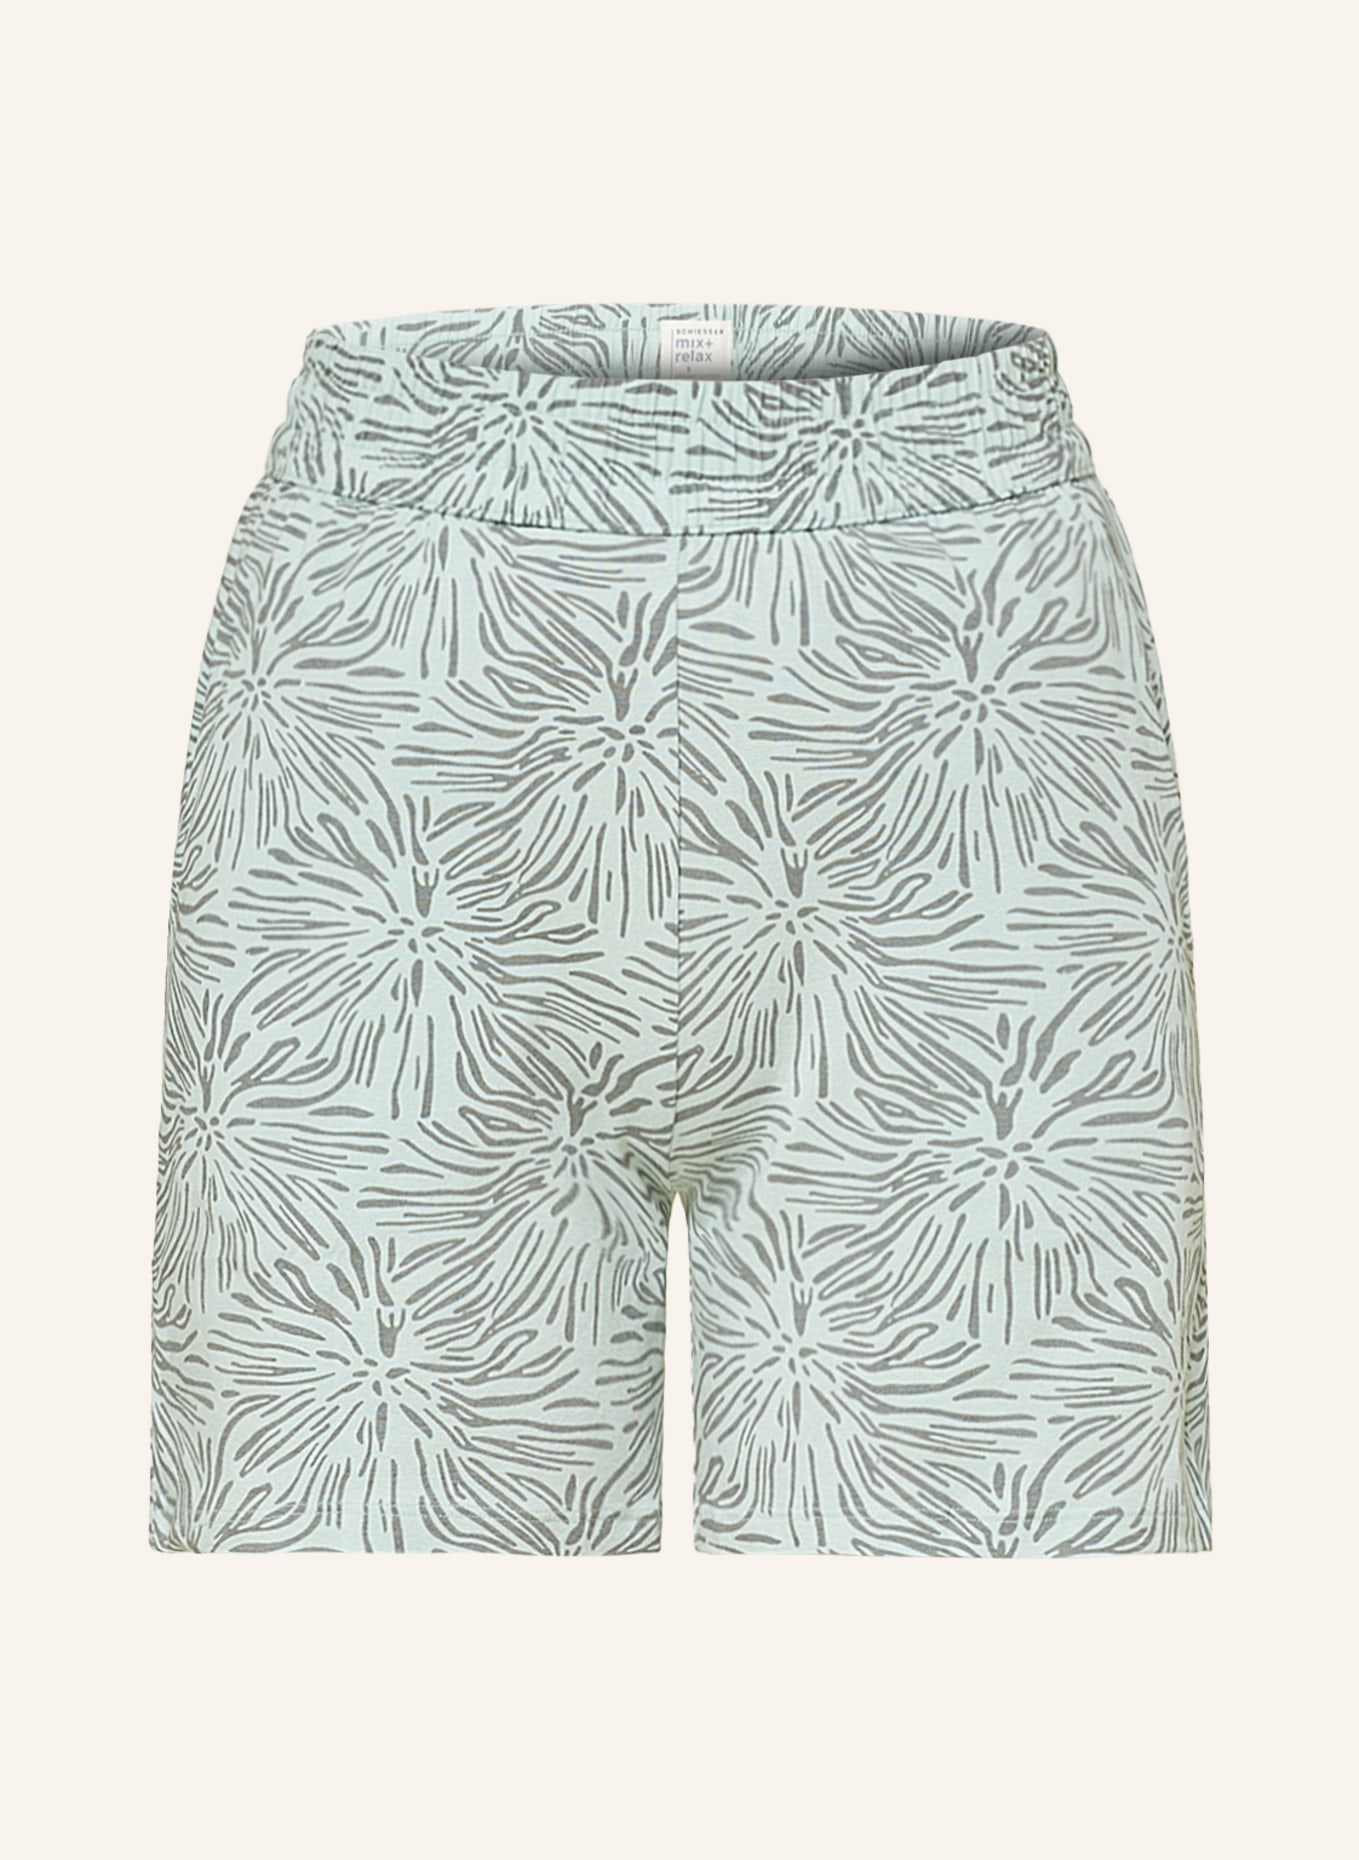 SCHIESSER Pajama shorts MIX+RELAX, Color: LIGHT GREEN/ GRAY (Image 1)